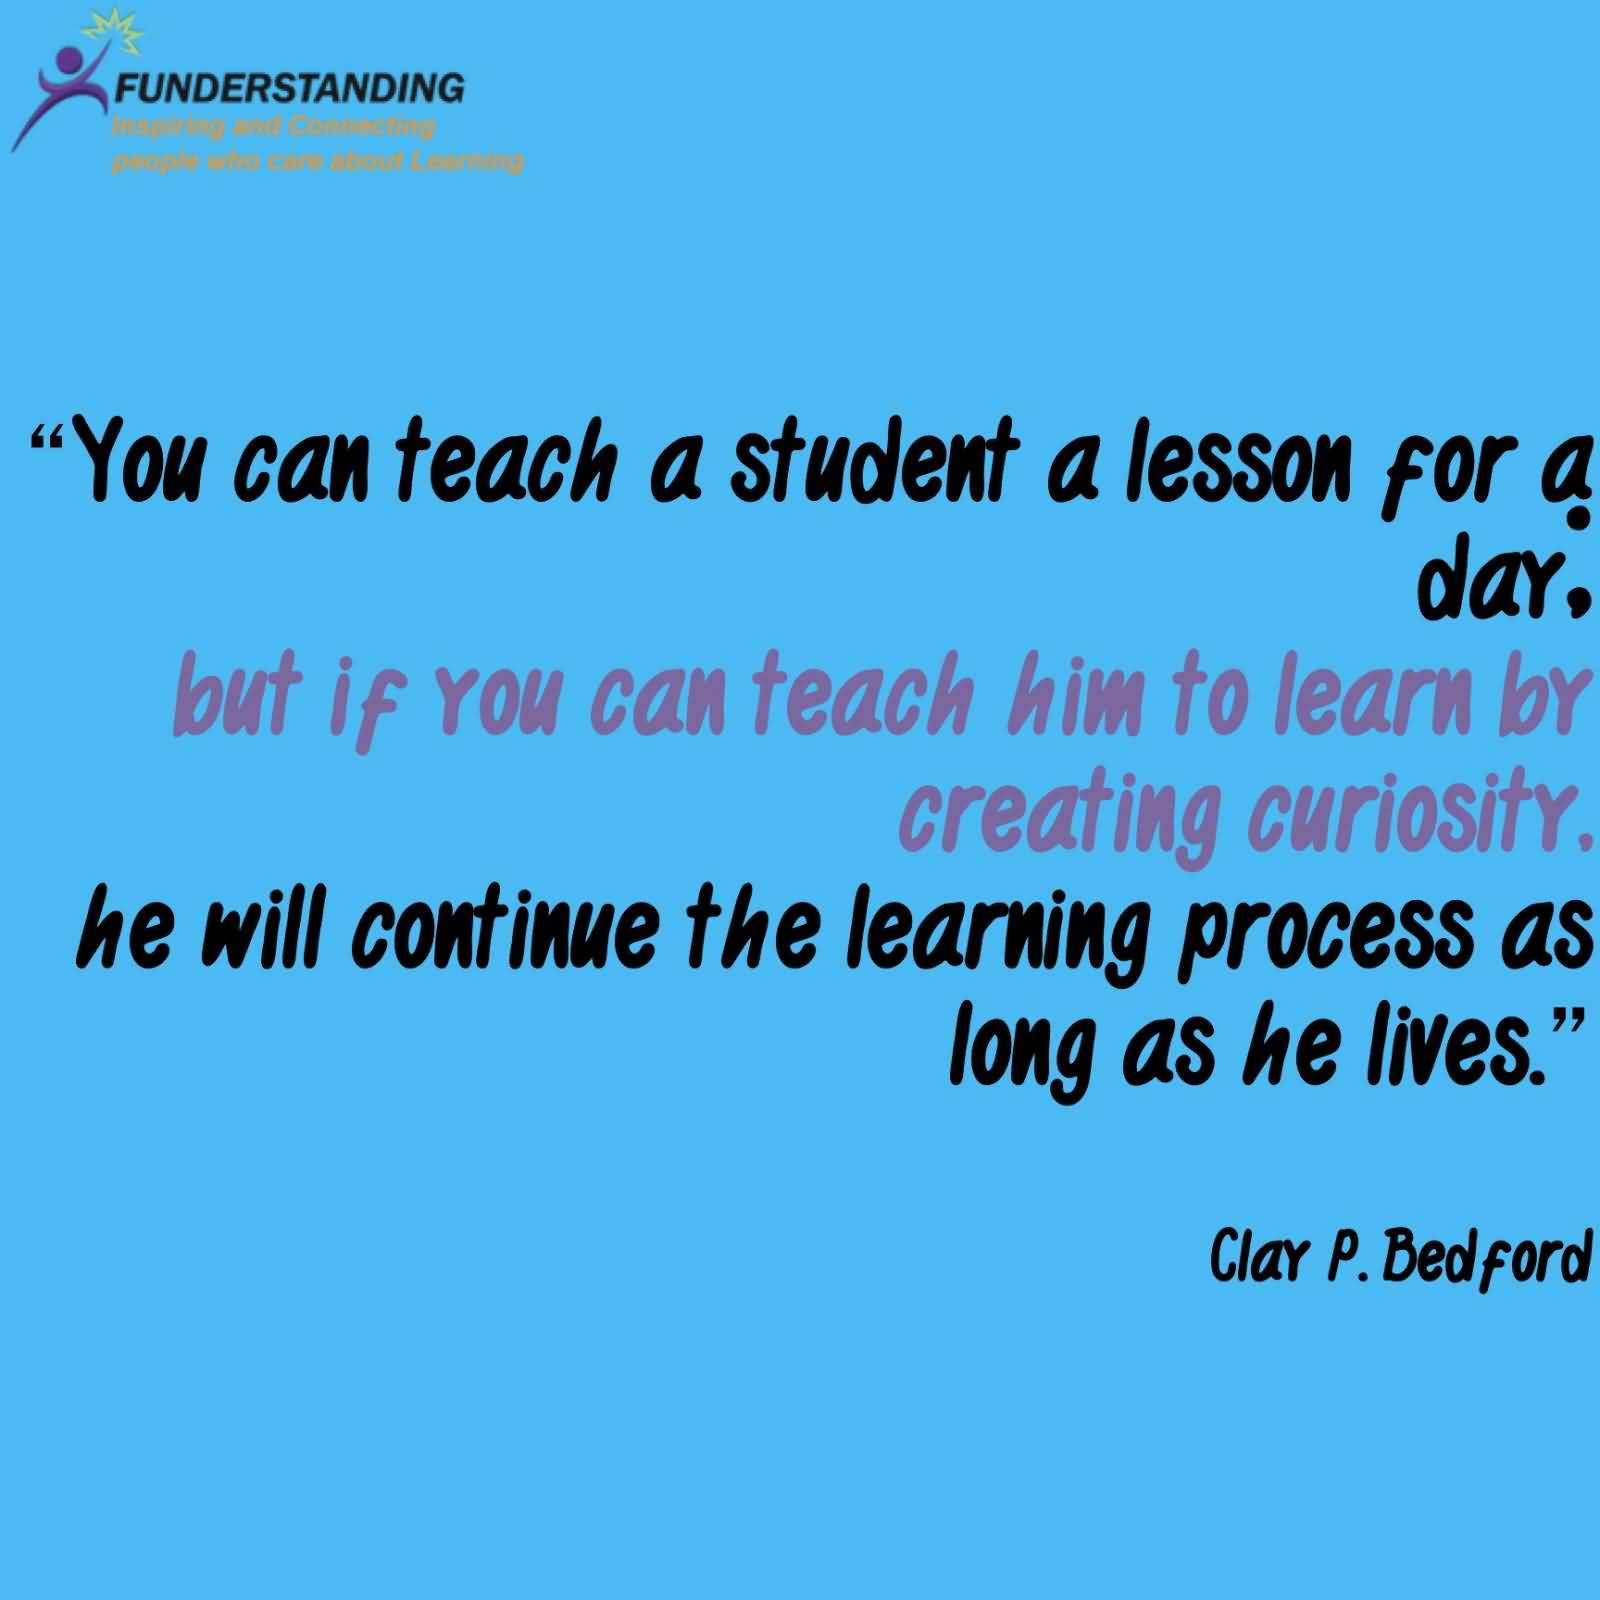 You can teach a student a lesson for a day; but if you can teach him to learn by creating curiosity, he will continue the learning process as long as he lives - Clar P. Bedford